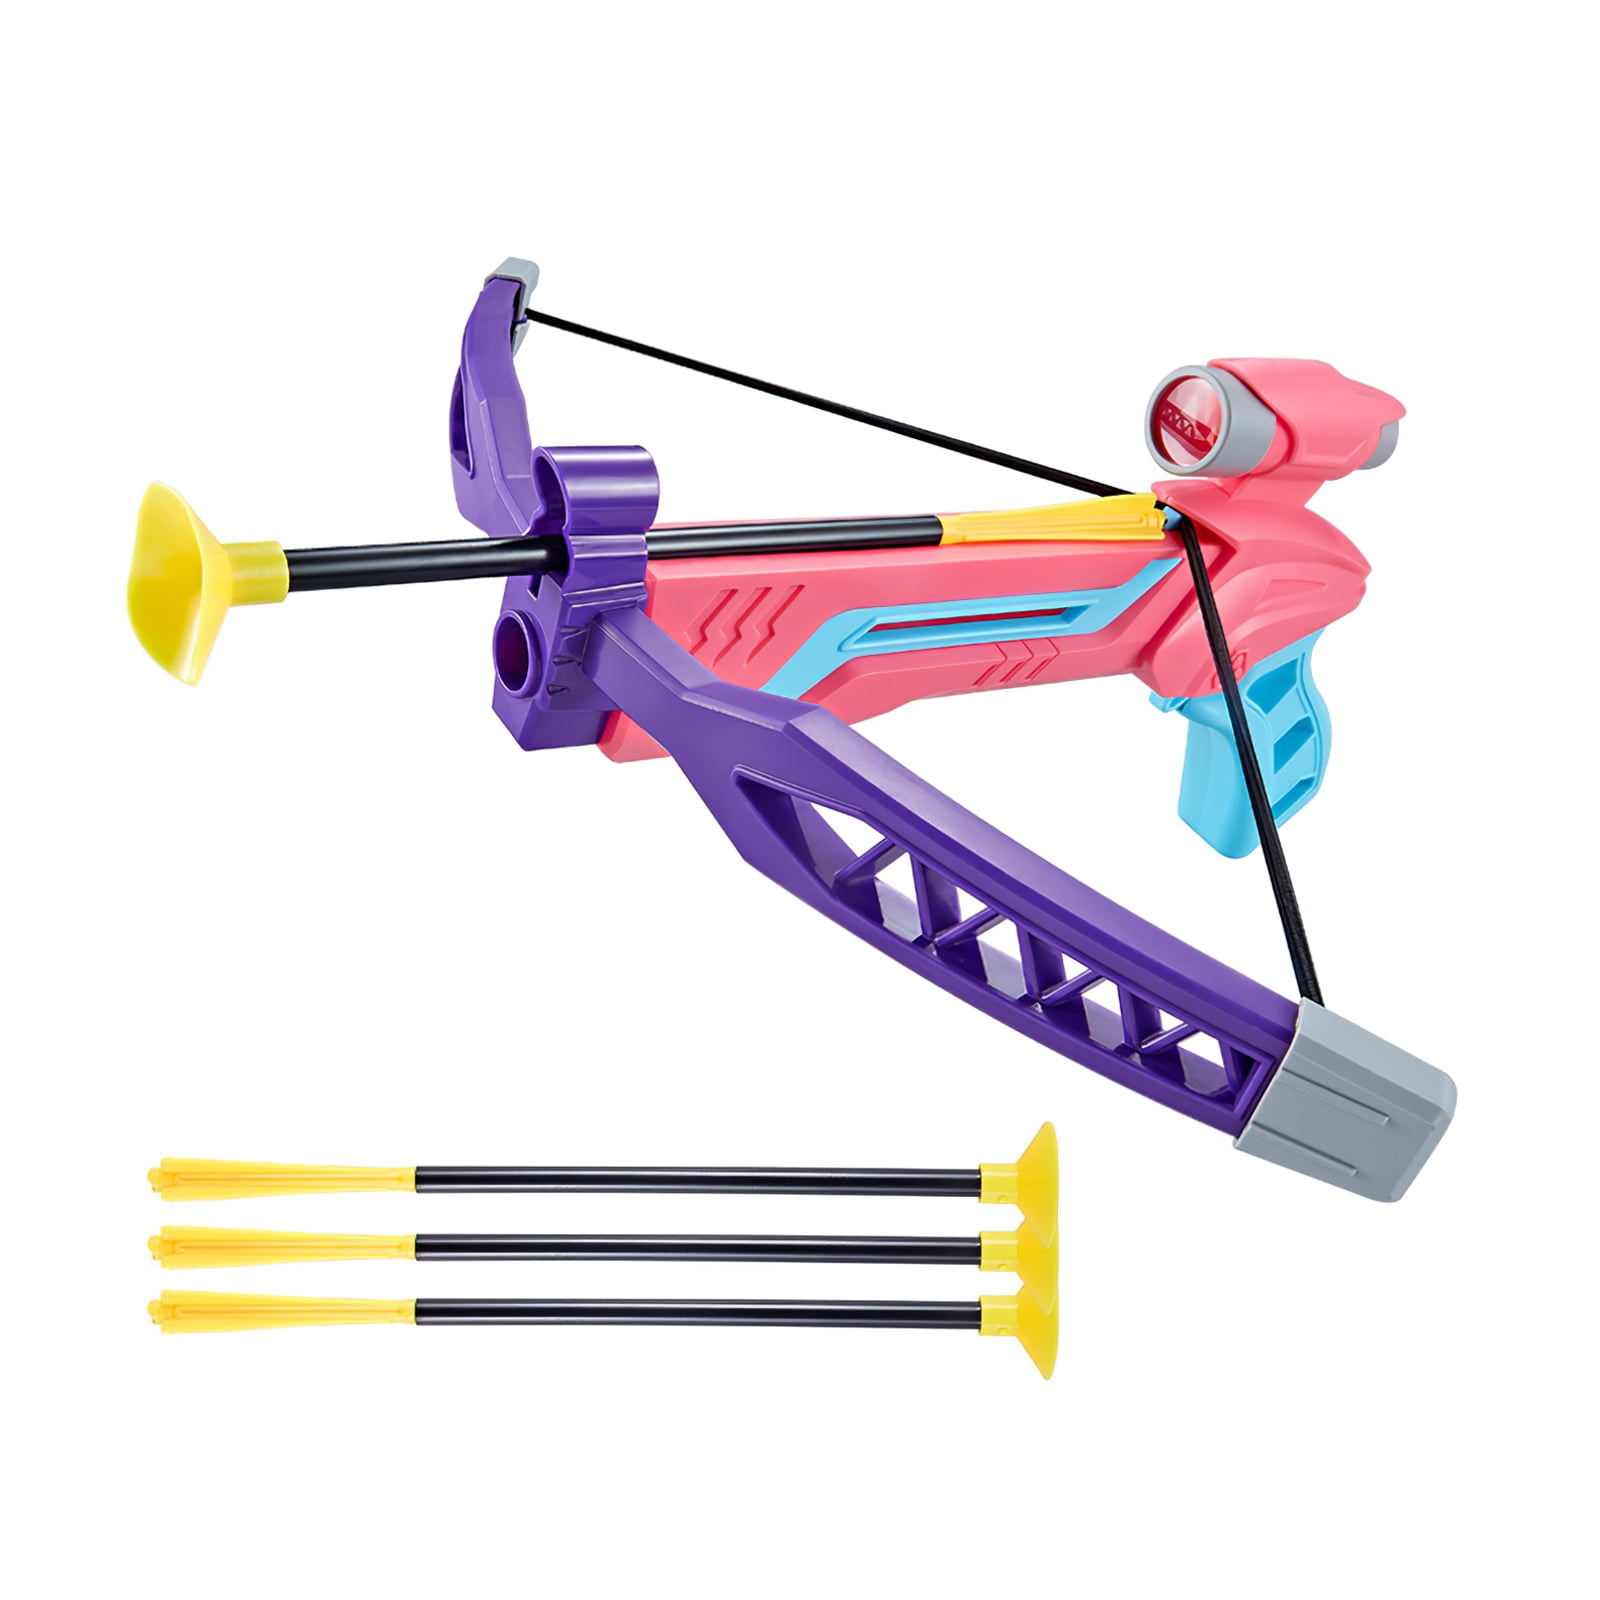 Green Sohapy Funny Bow and Arrow Sets Kids Toy Archery Set for Target Outdoor Garden Fun Game Sport & Party Favors 